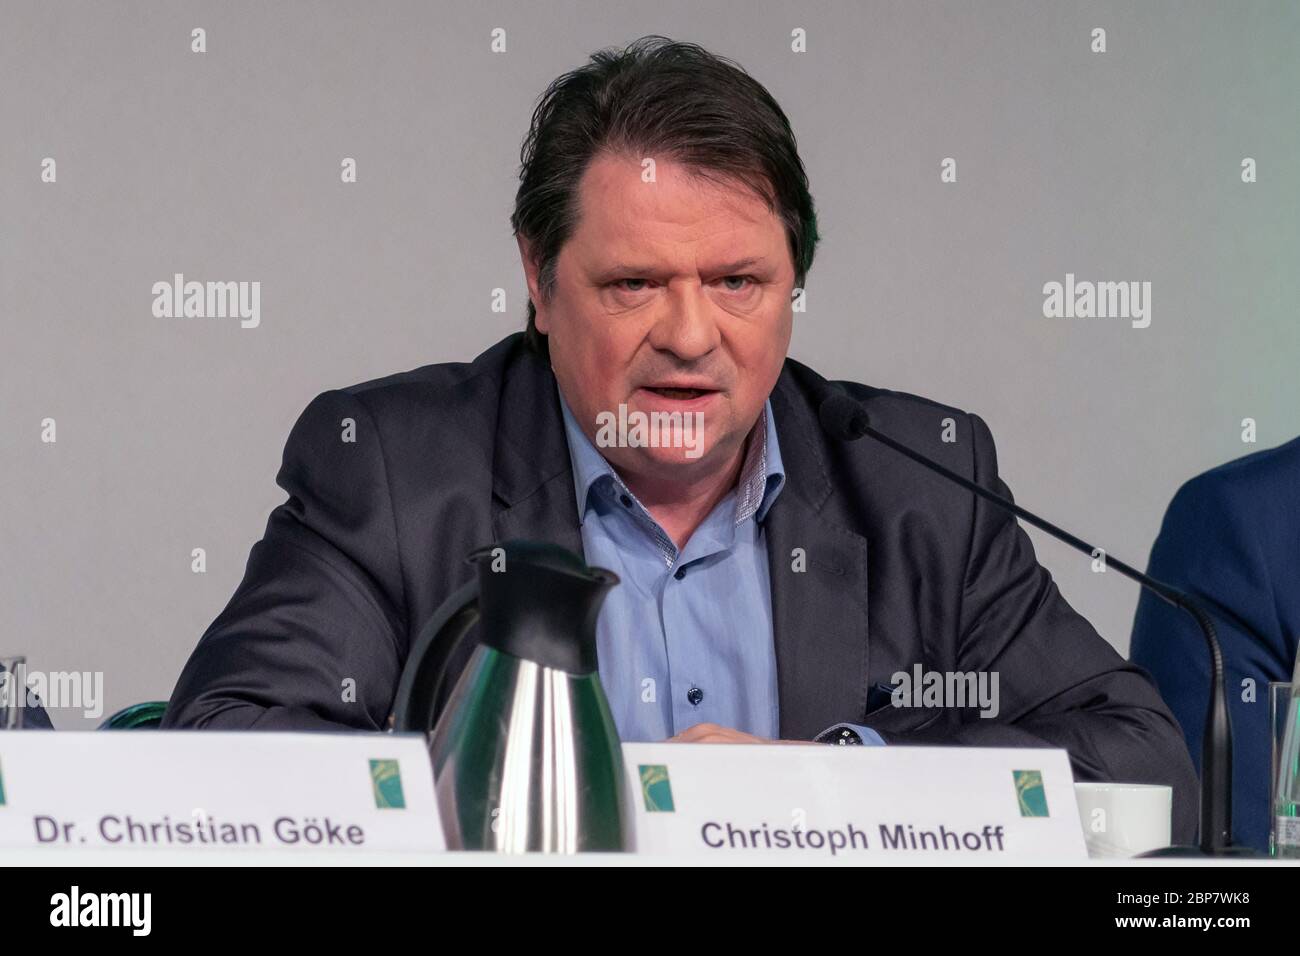 Christoph Minhoff, General Manager of the Federation for Food Law and Food Science (BLL) and the Federal Association of the German Food Industry (BVE) at the IGW 2020 opening press conference of the International Green Week 2020. Stock Photo